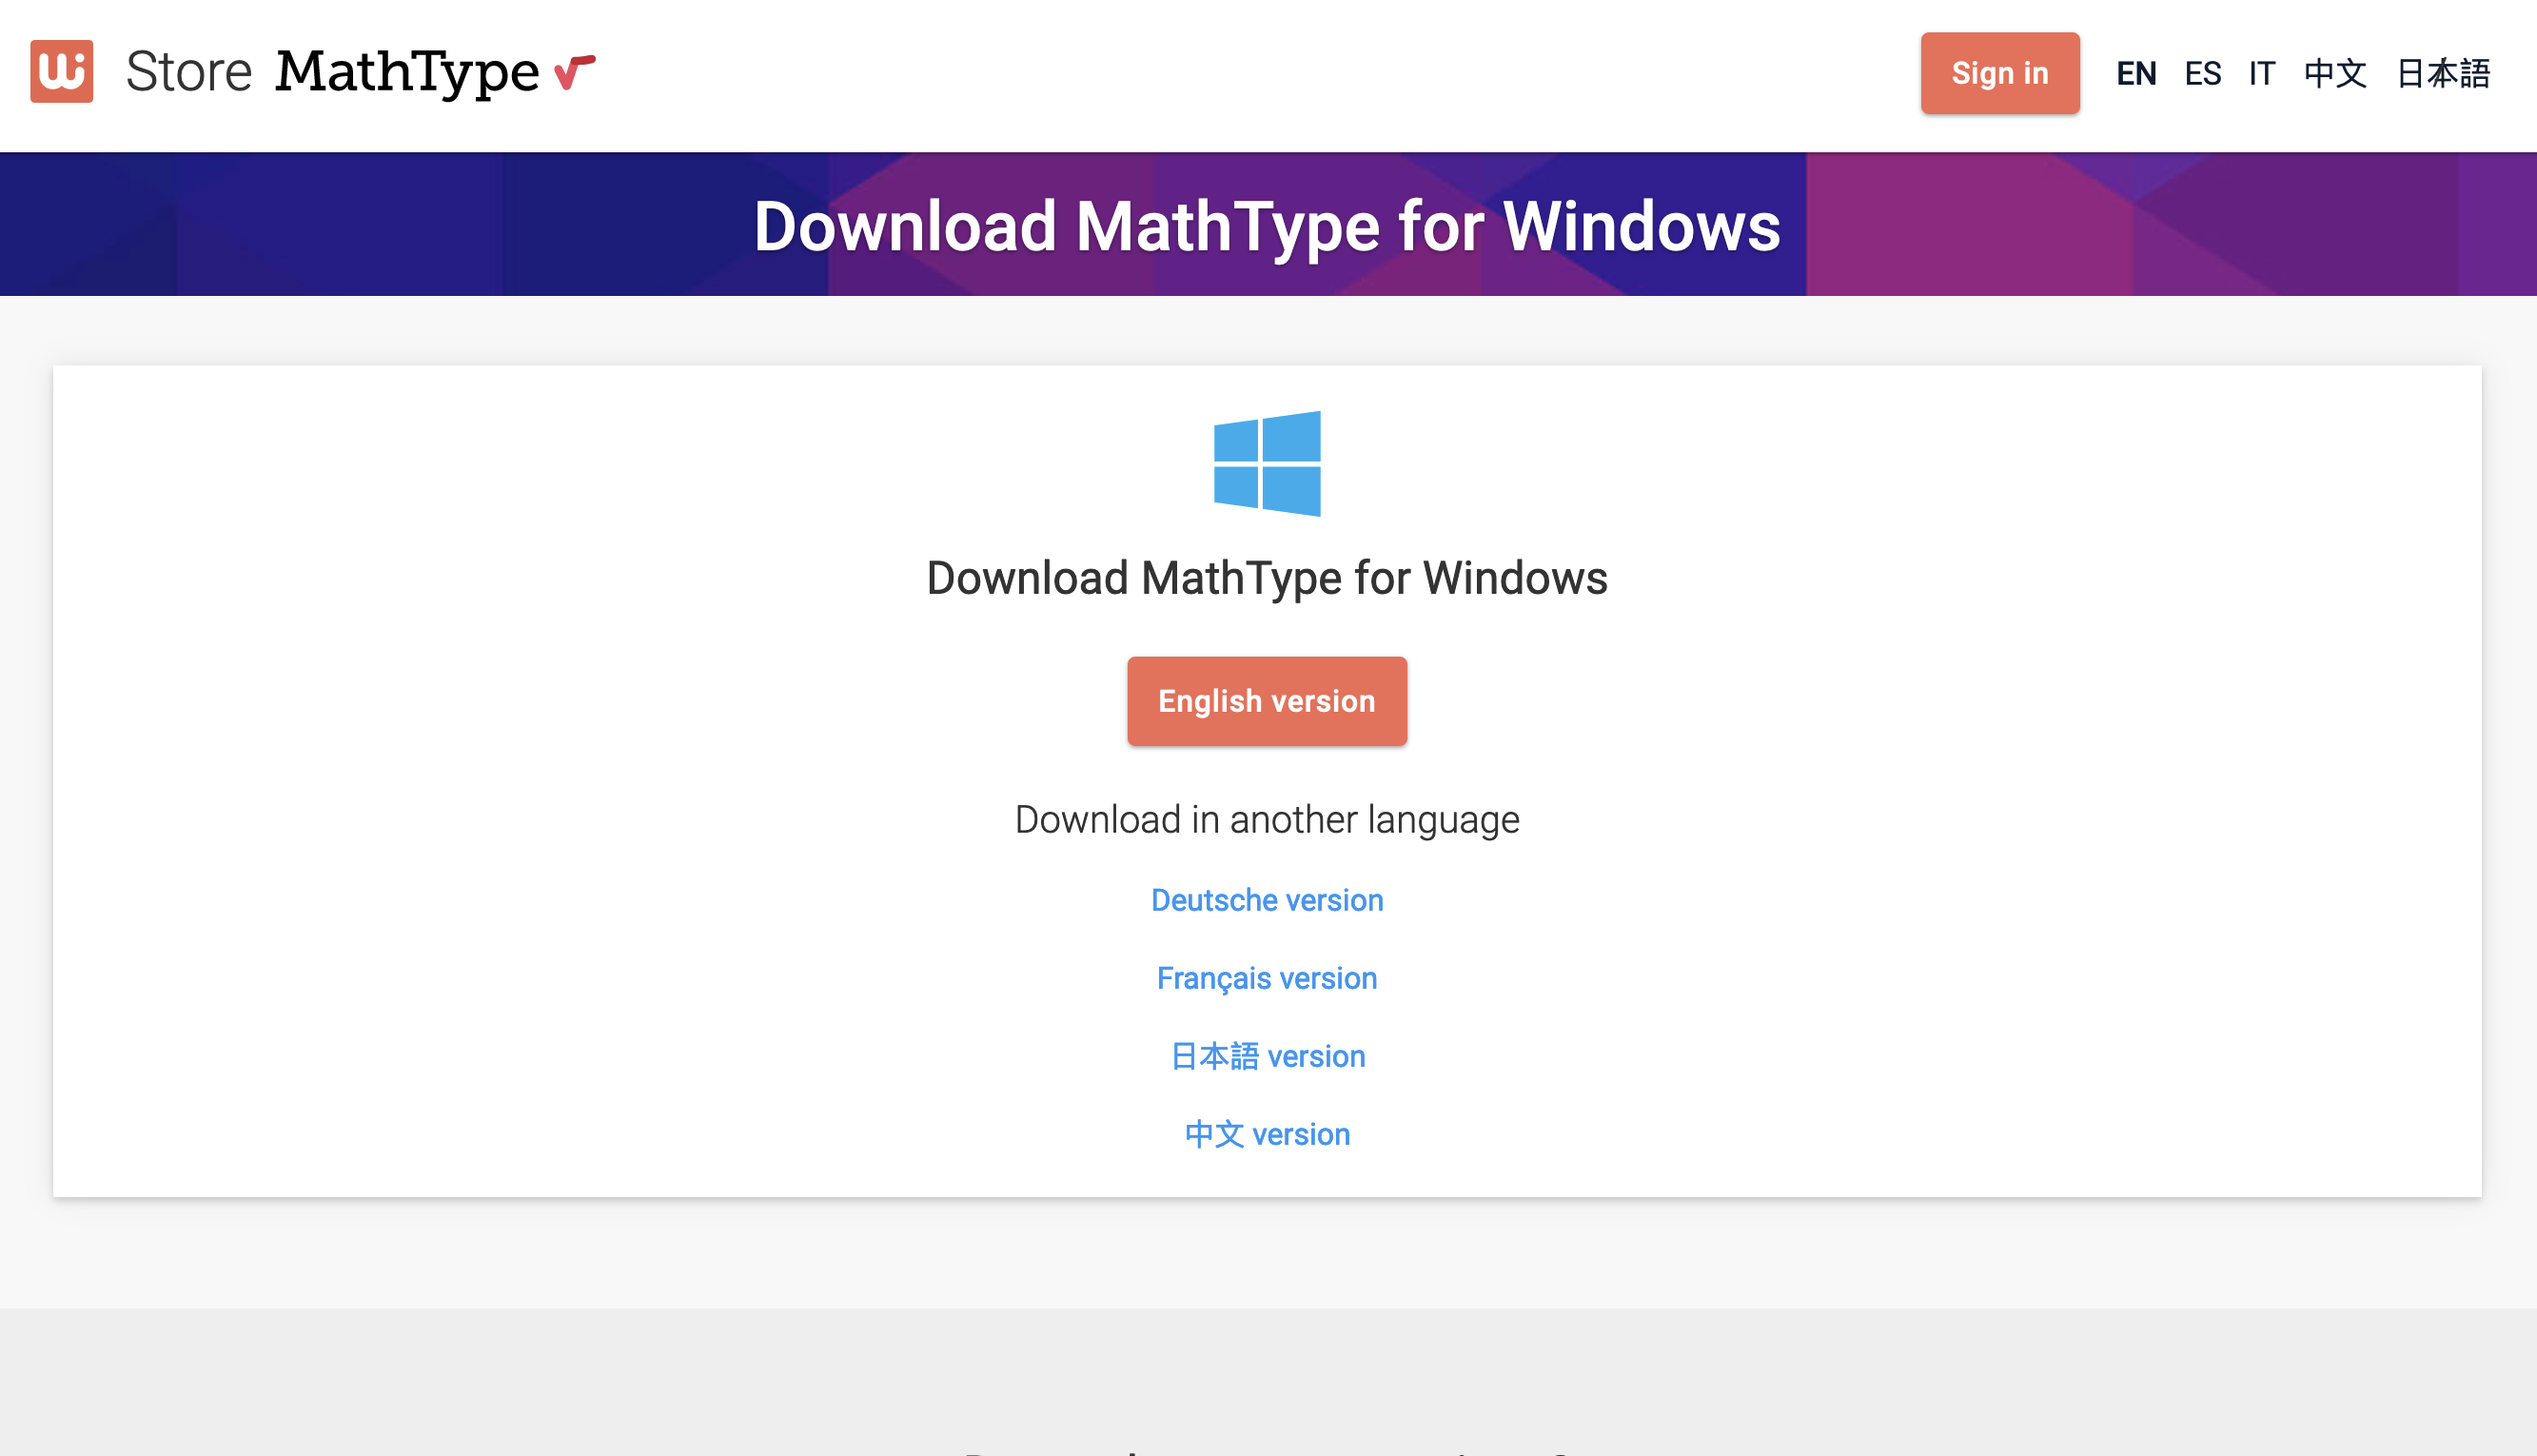 Image of the download page of MathType 7 with the language options